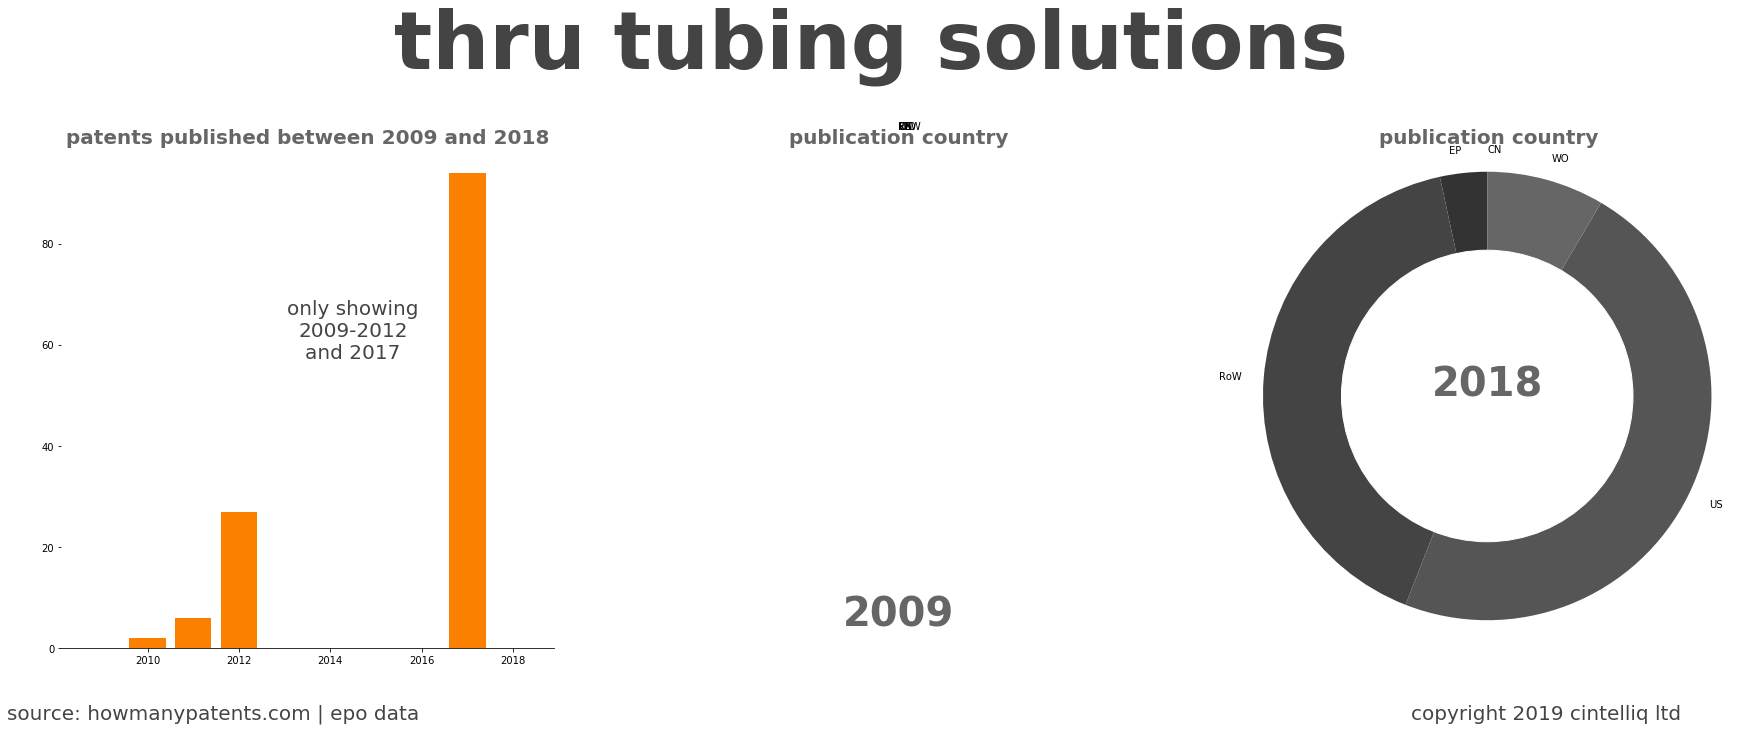 summary of patents for Thru Tubing Solutions